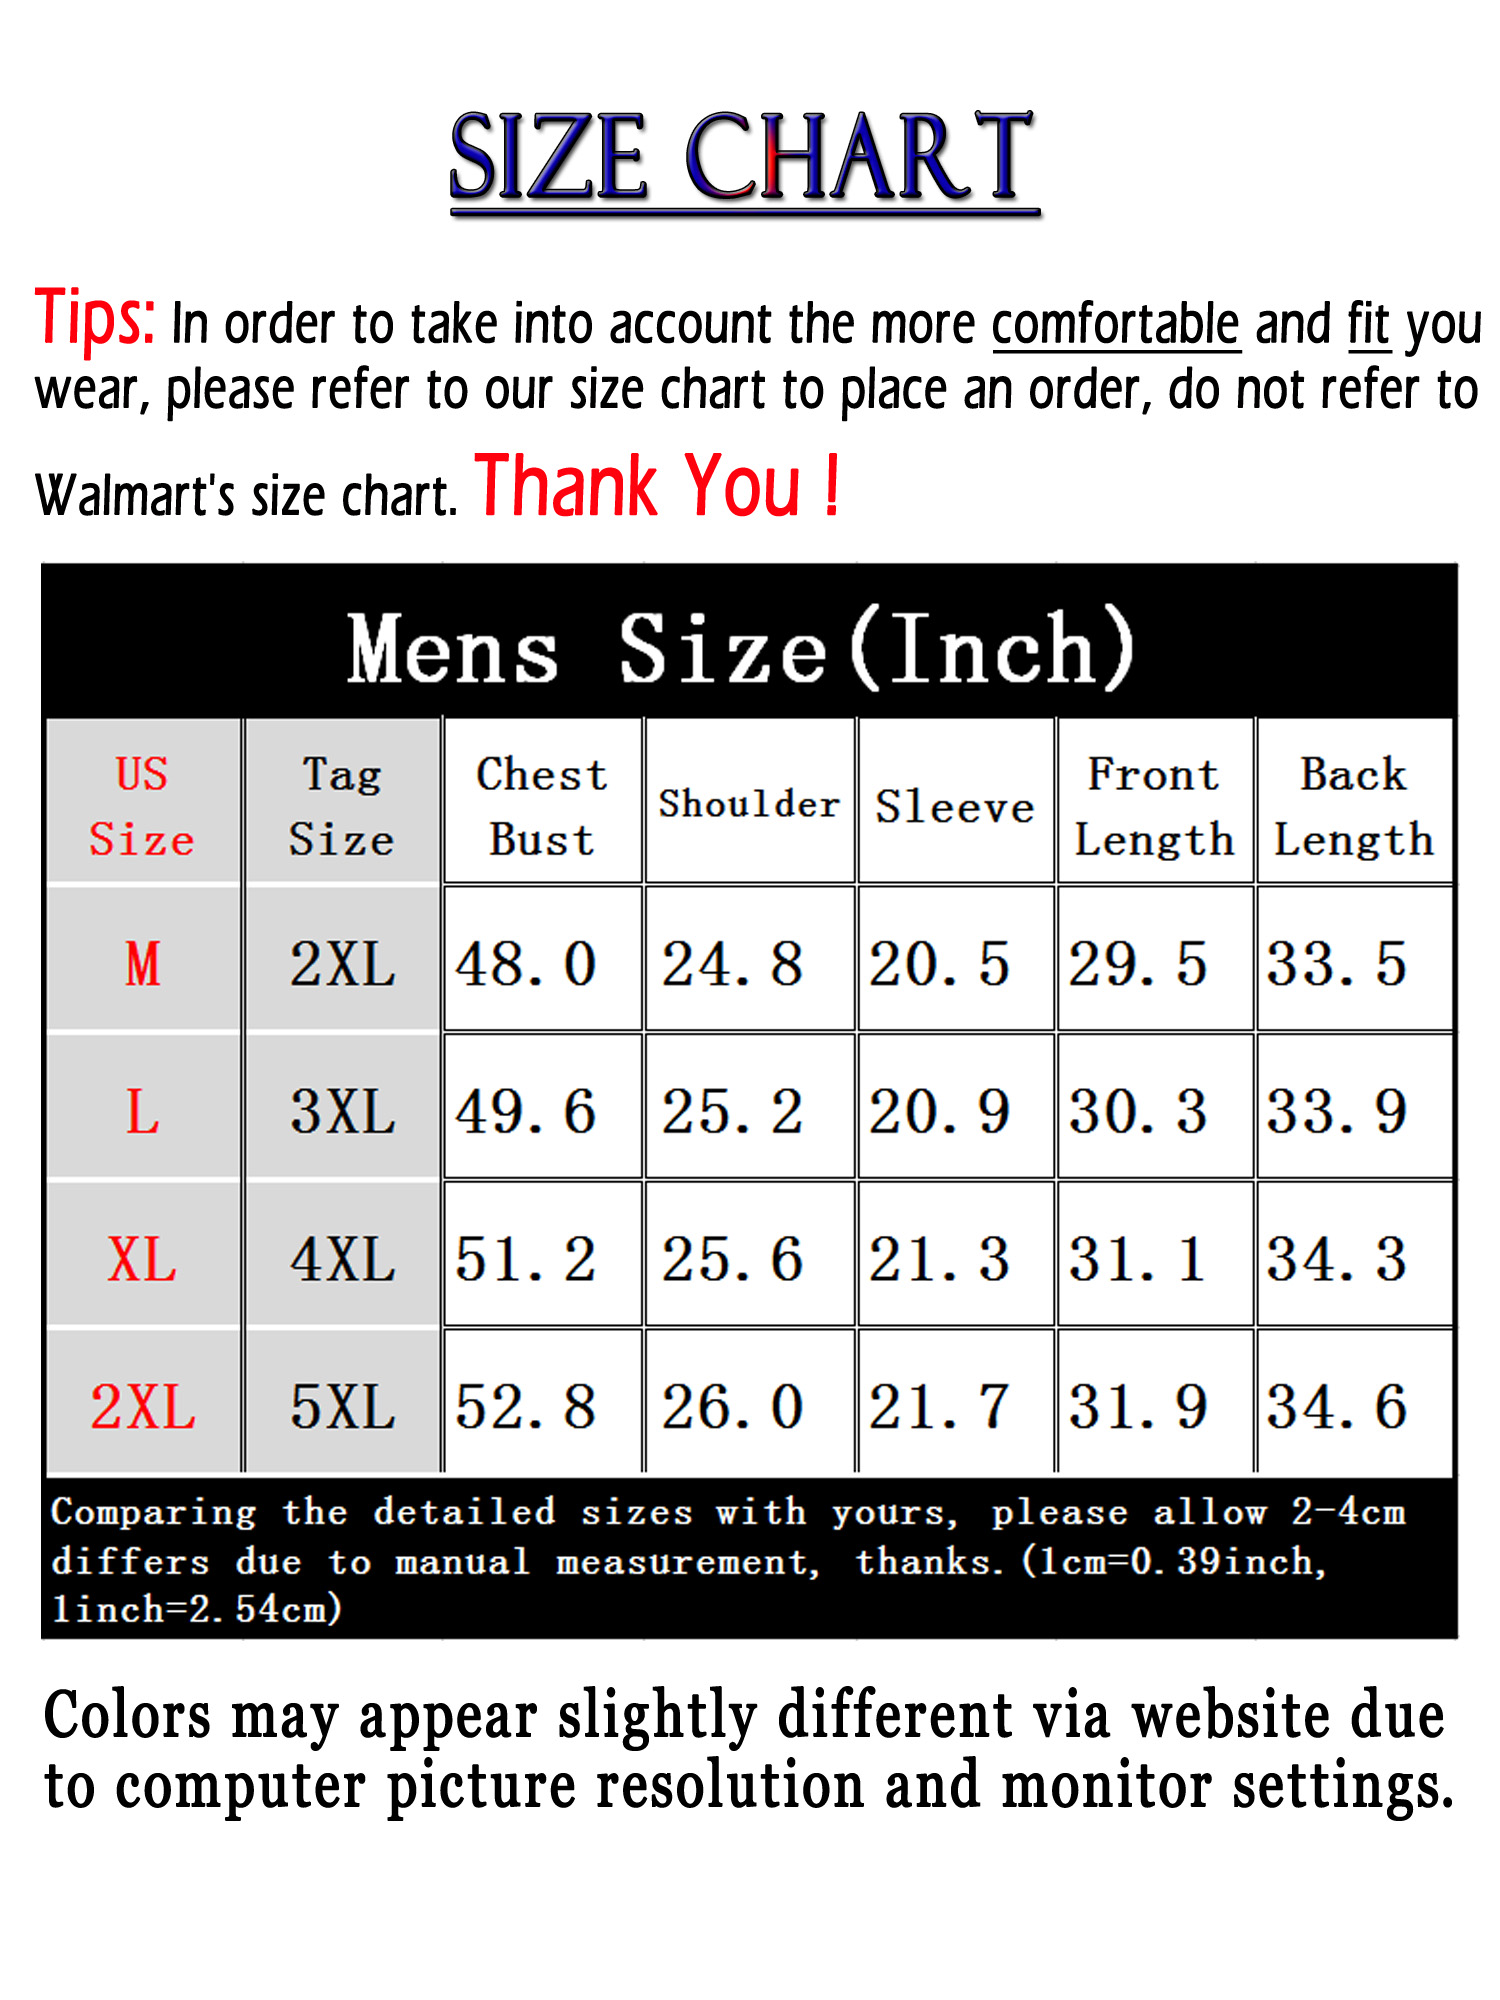 LELINTA 2 Pack Men's Dress Shirts Slim Fit Cotton Long Sleeve Plaid Shirt Casual Button Down Shirts for men - image 2 of 7